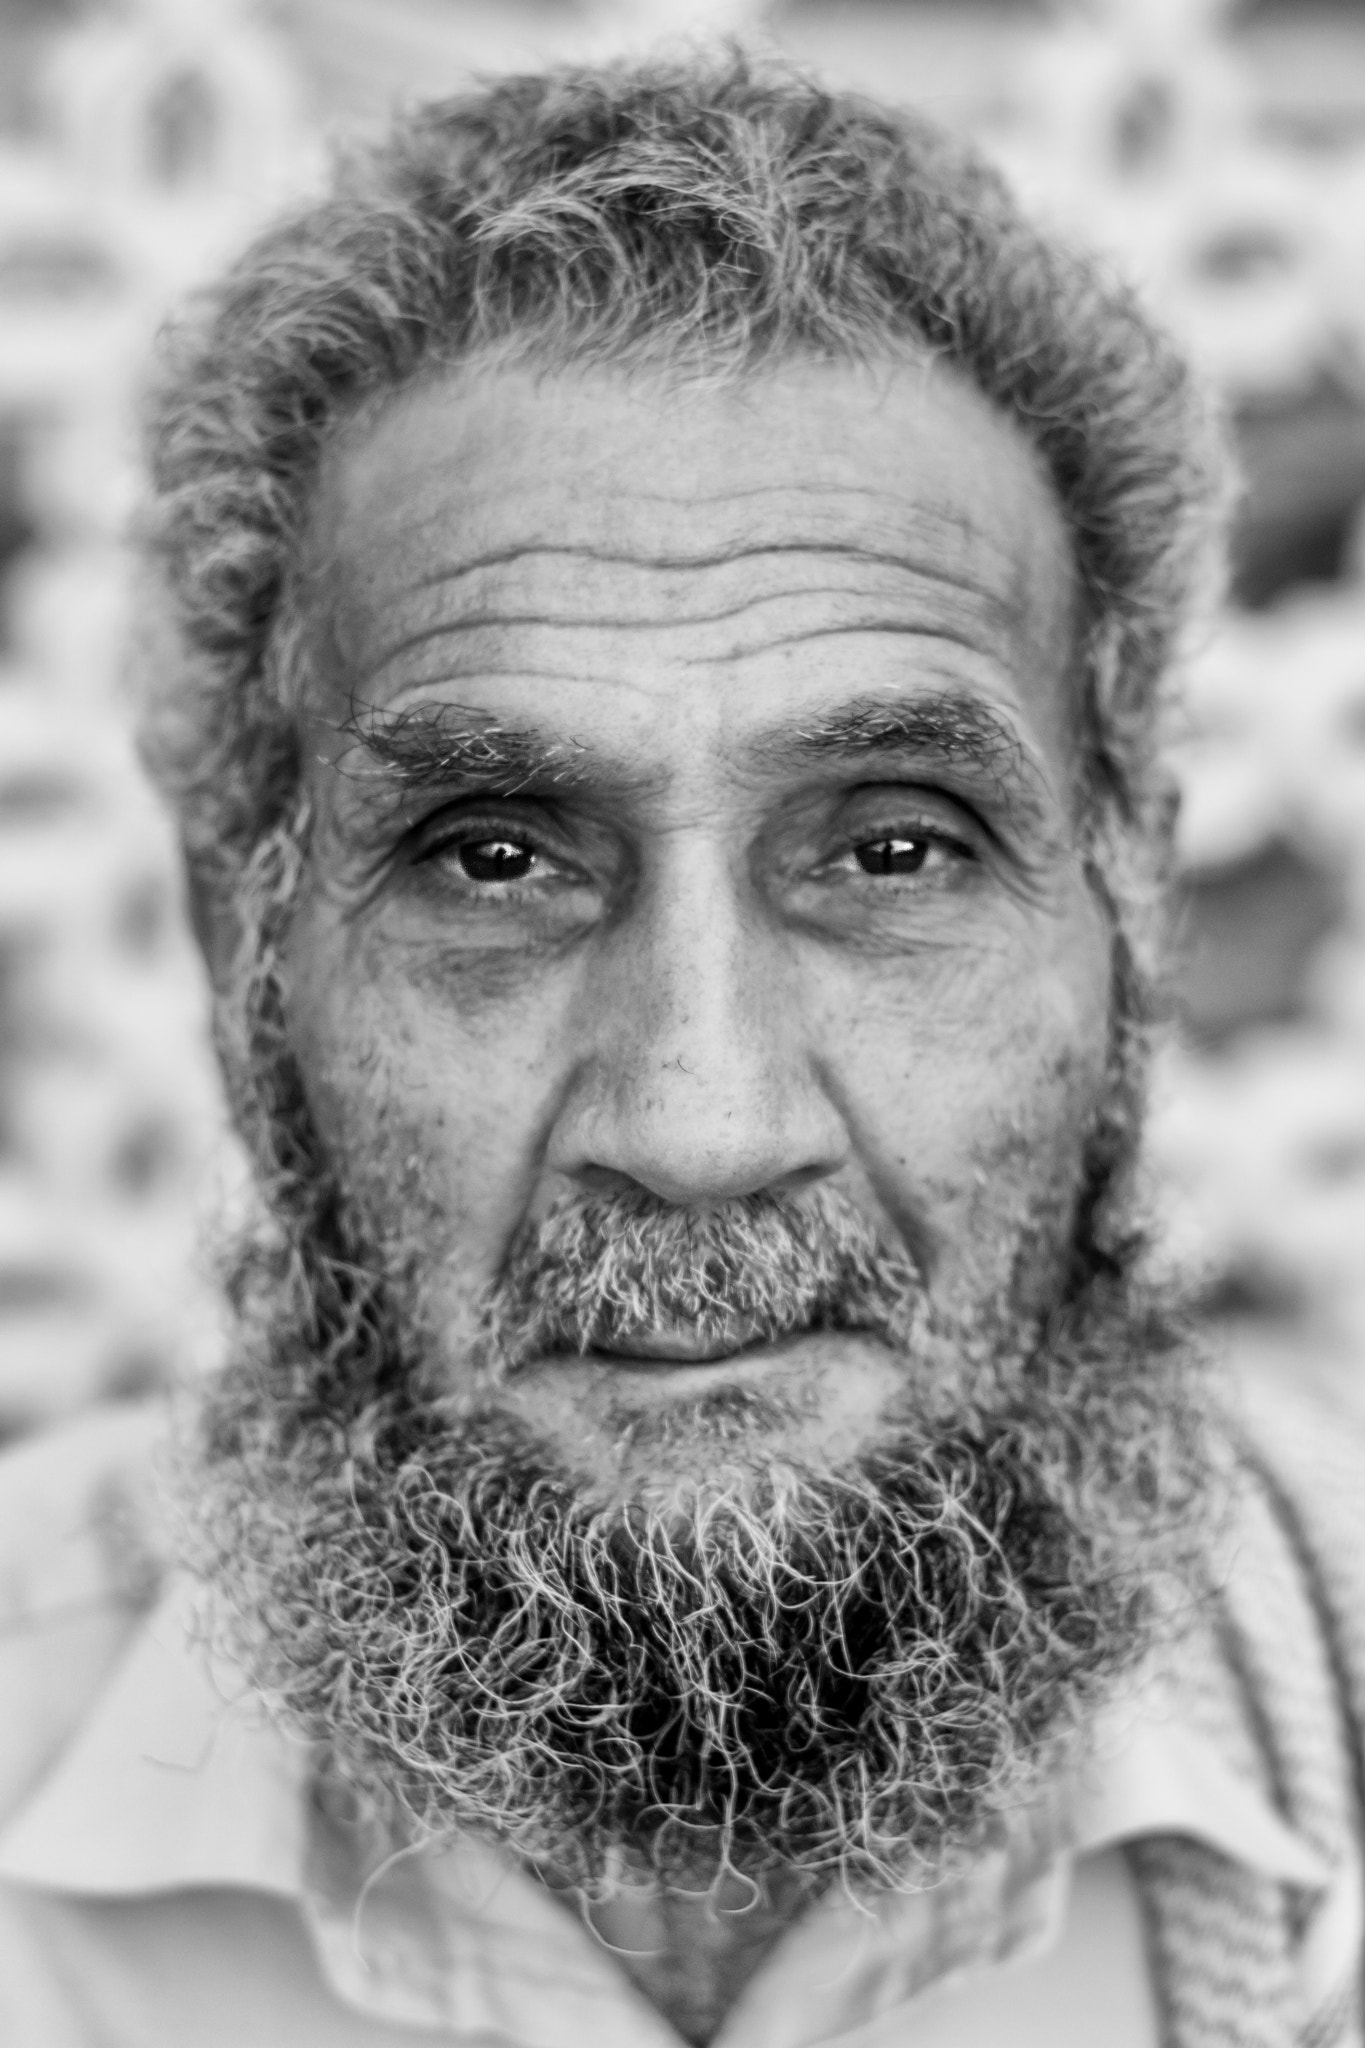 Sony a6000 sample photo. Old man portrait photography